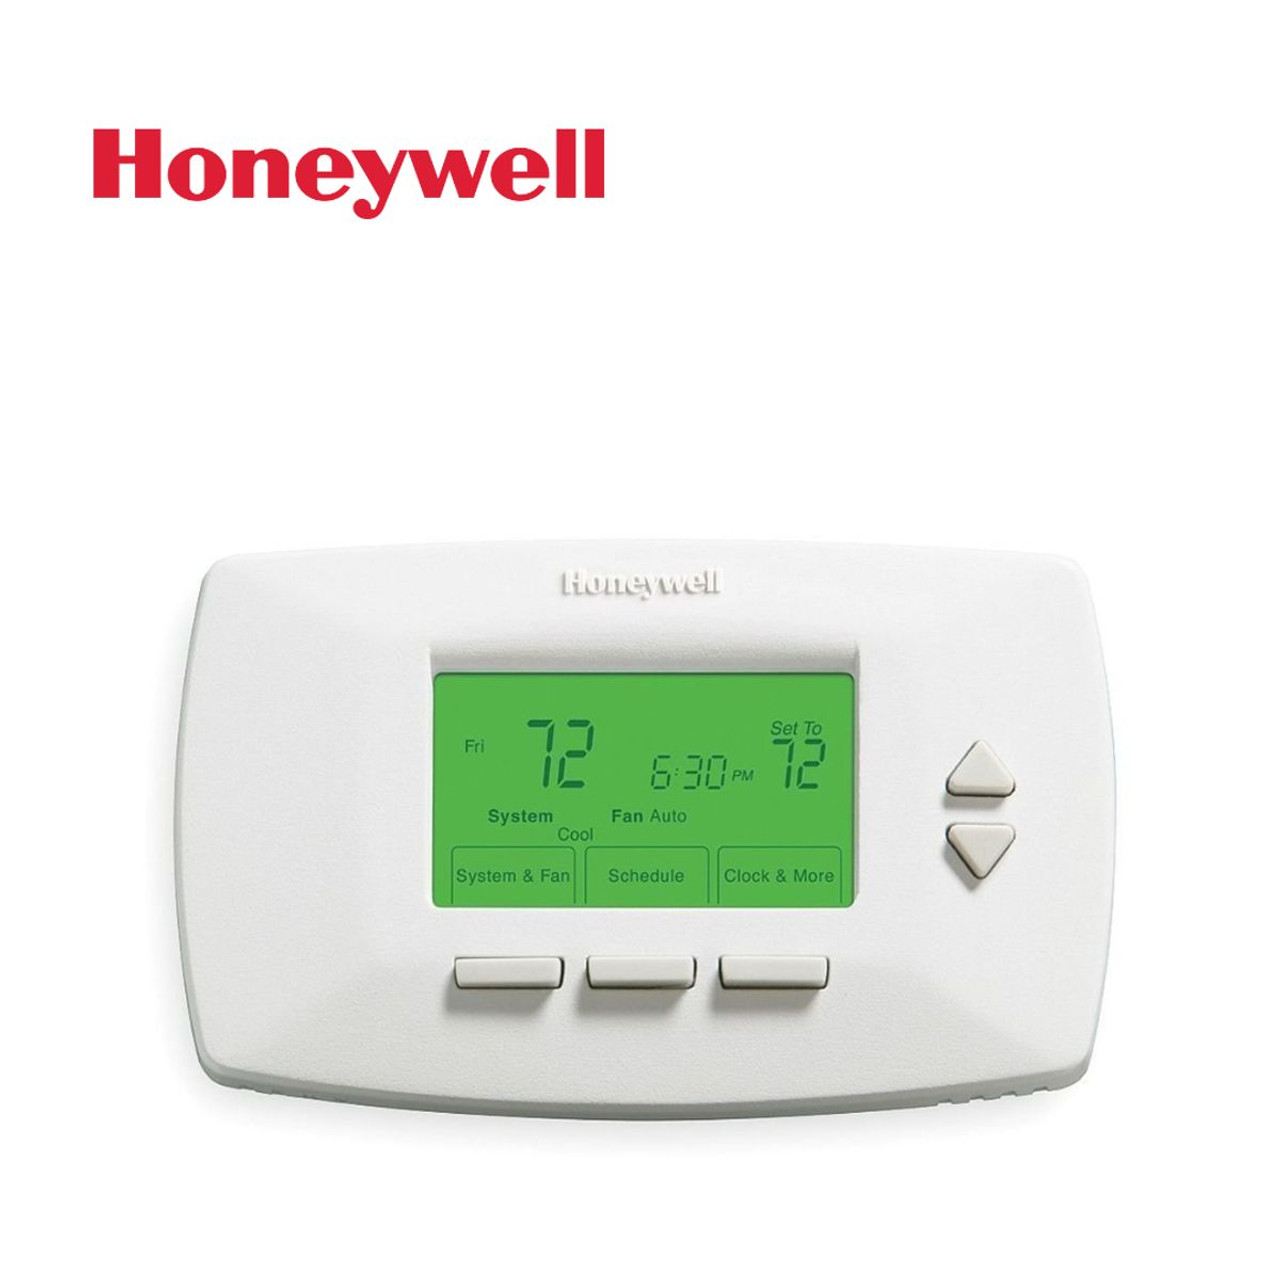 Honeywell CommerCialPro 7000 Programmable Commercial Thermostat product image